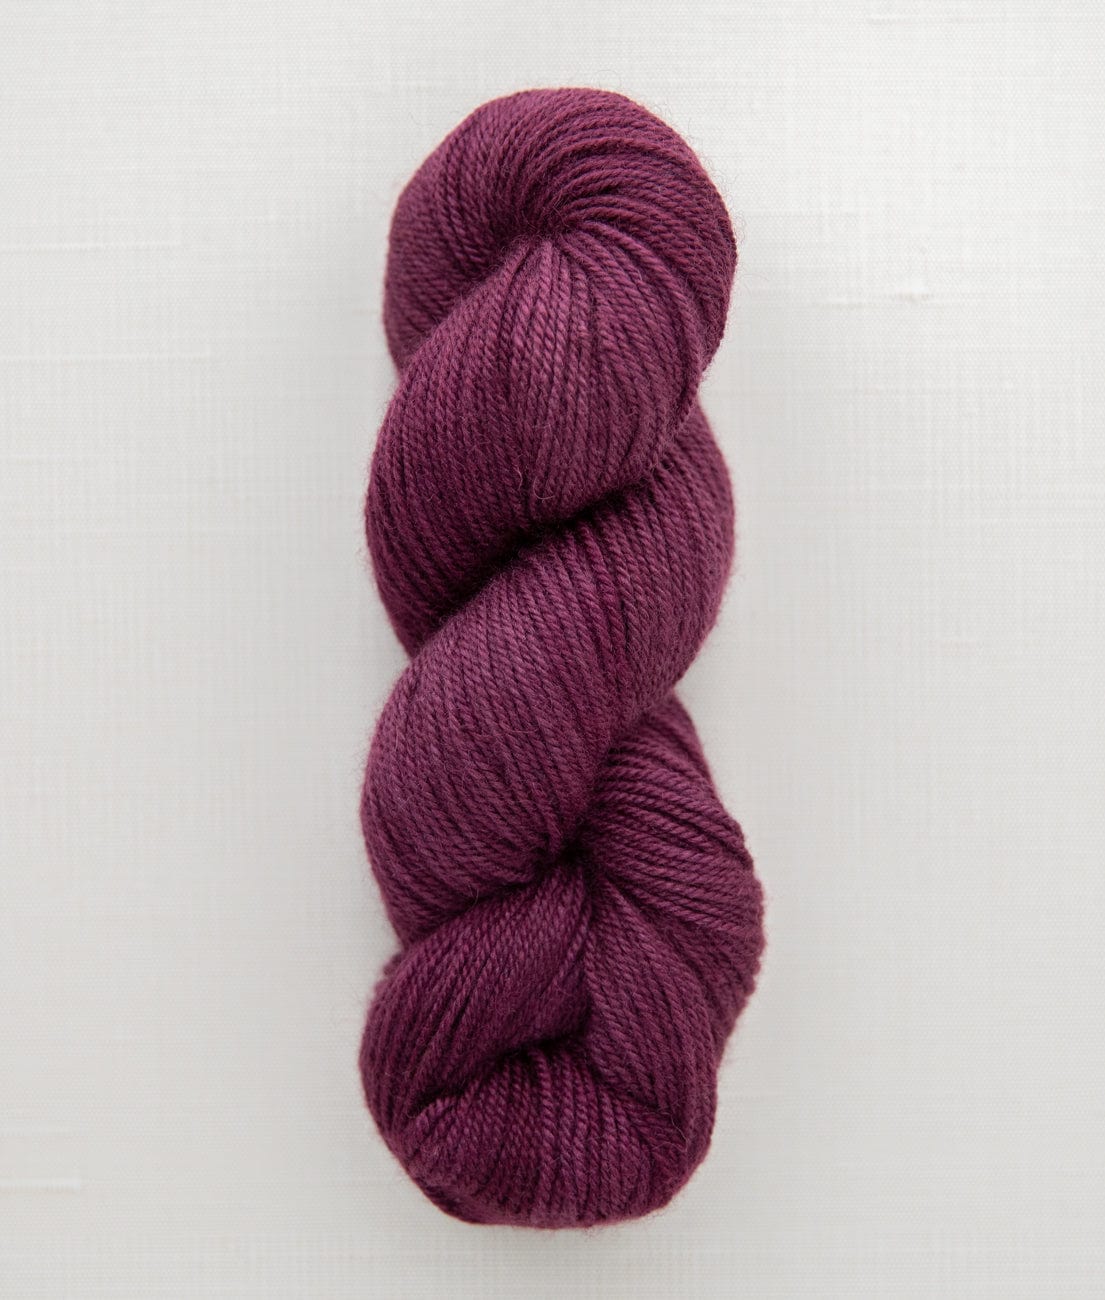 The Pros and Cons of Silk Yarn Blends - SweetGeorgia Yarns